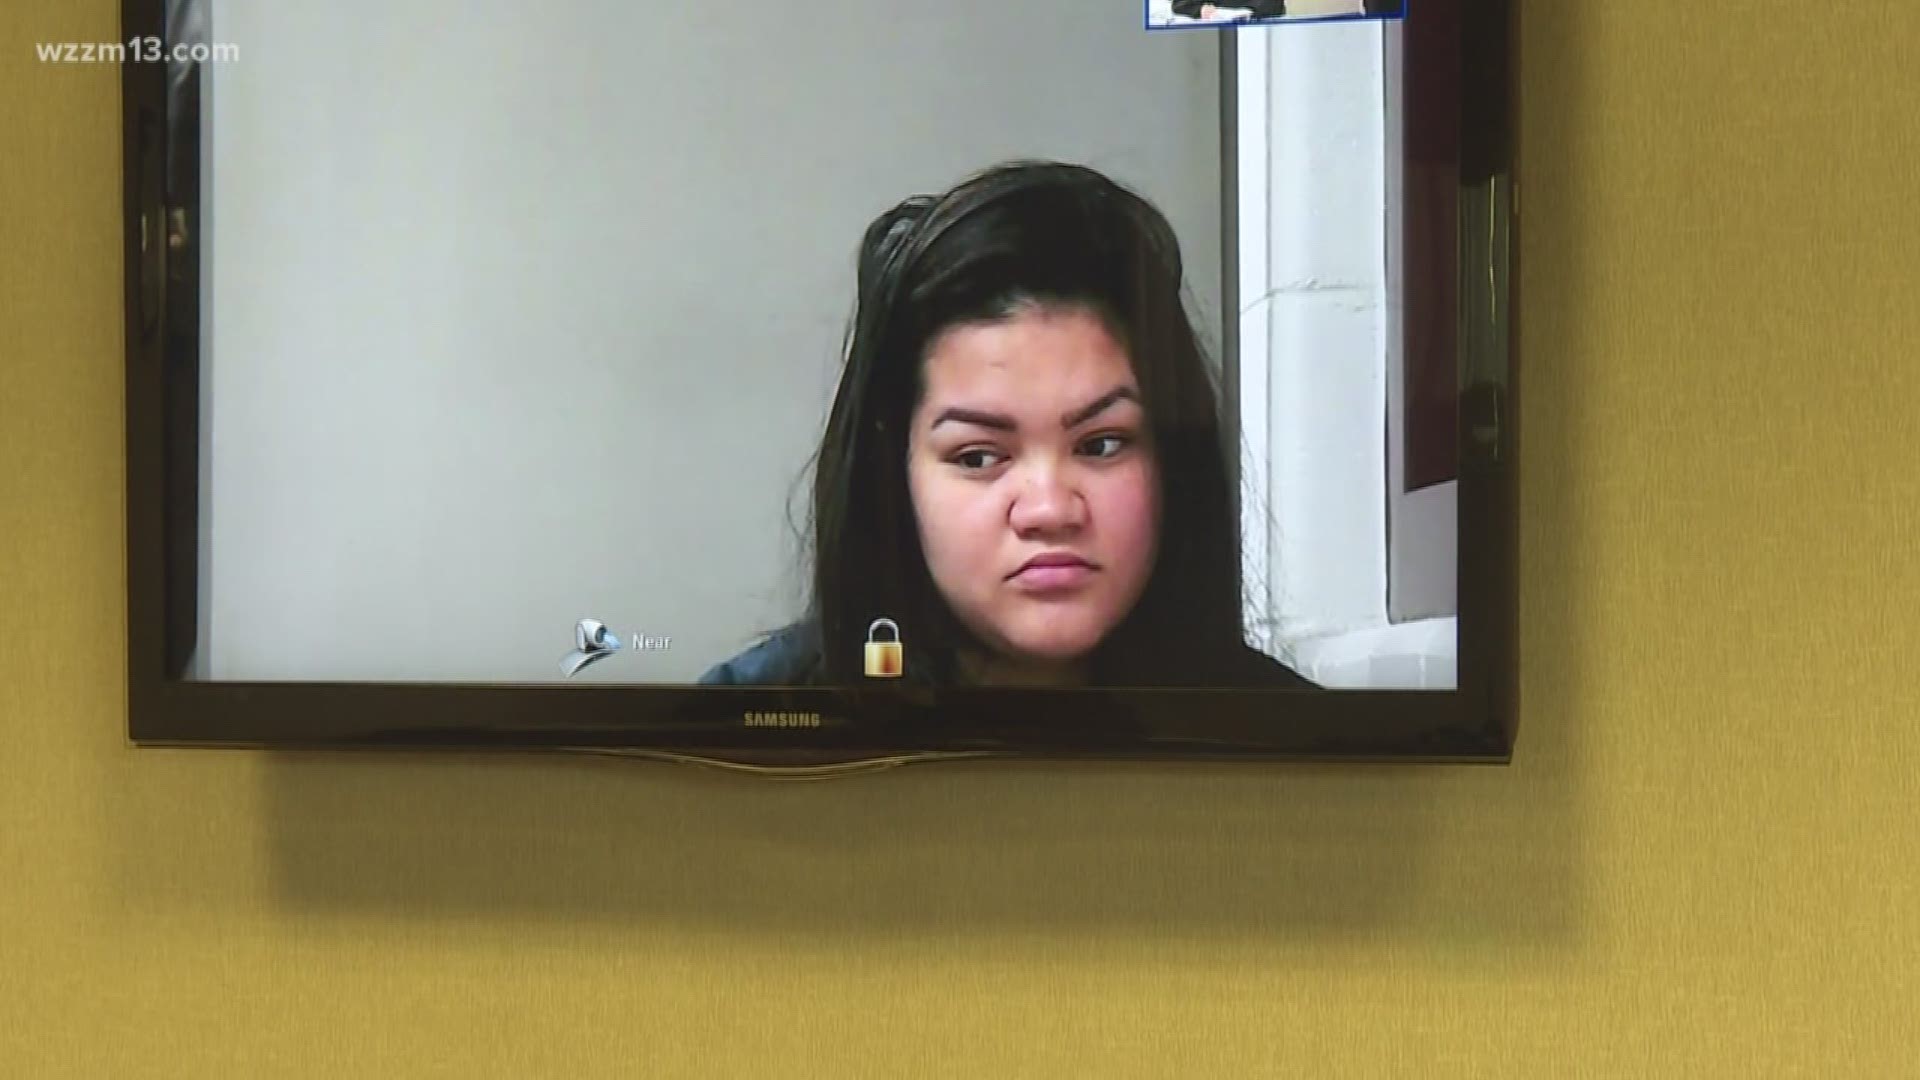 A 20-year-old mother is facing multiple felony charges for lying to police.